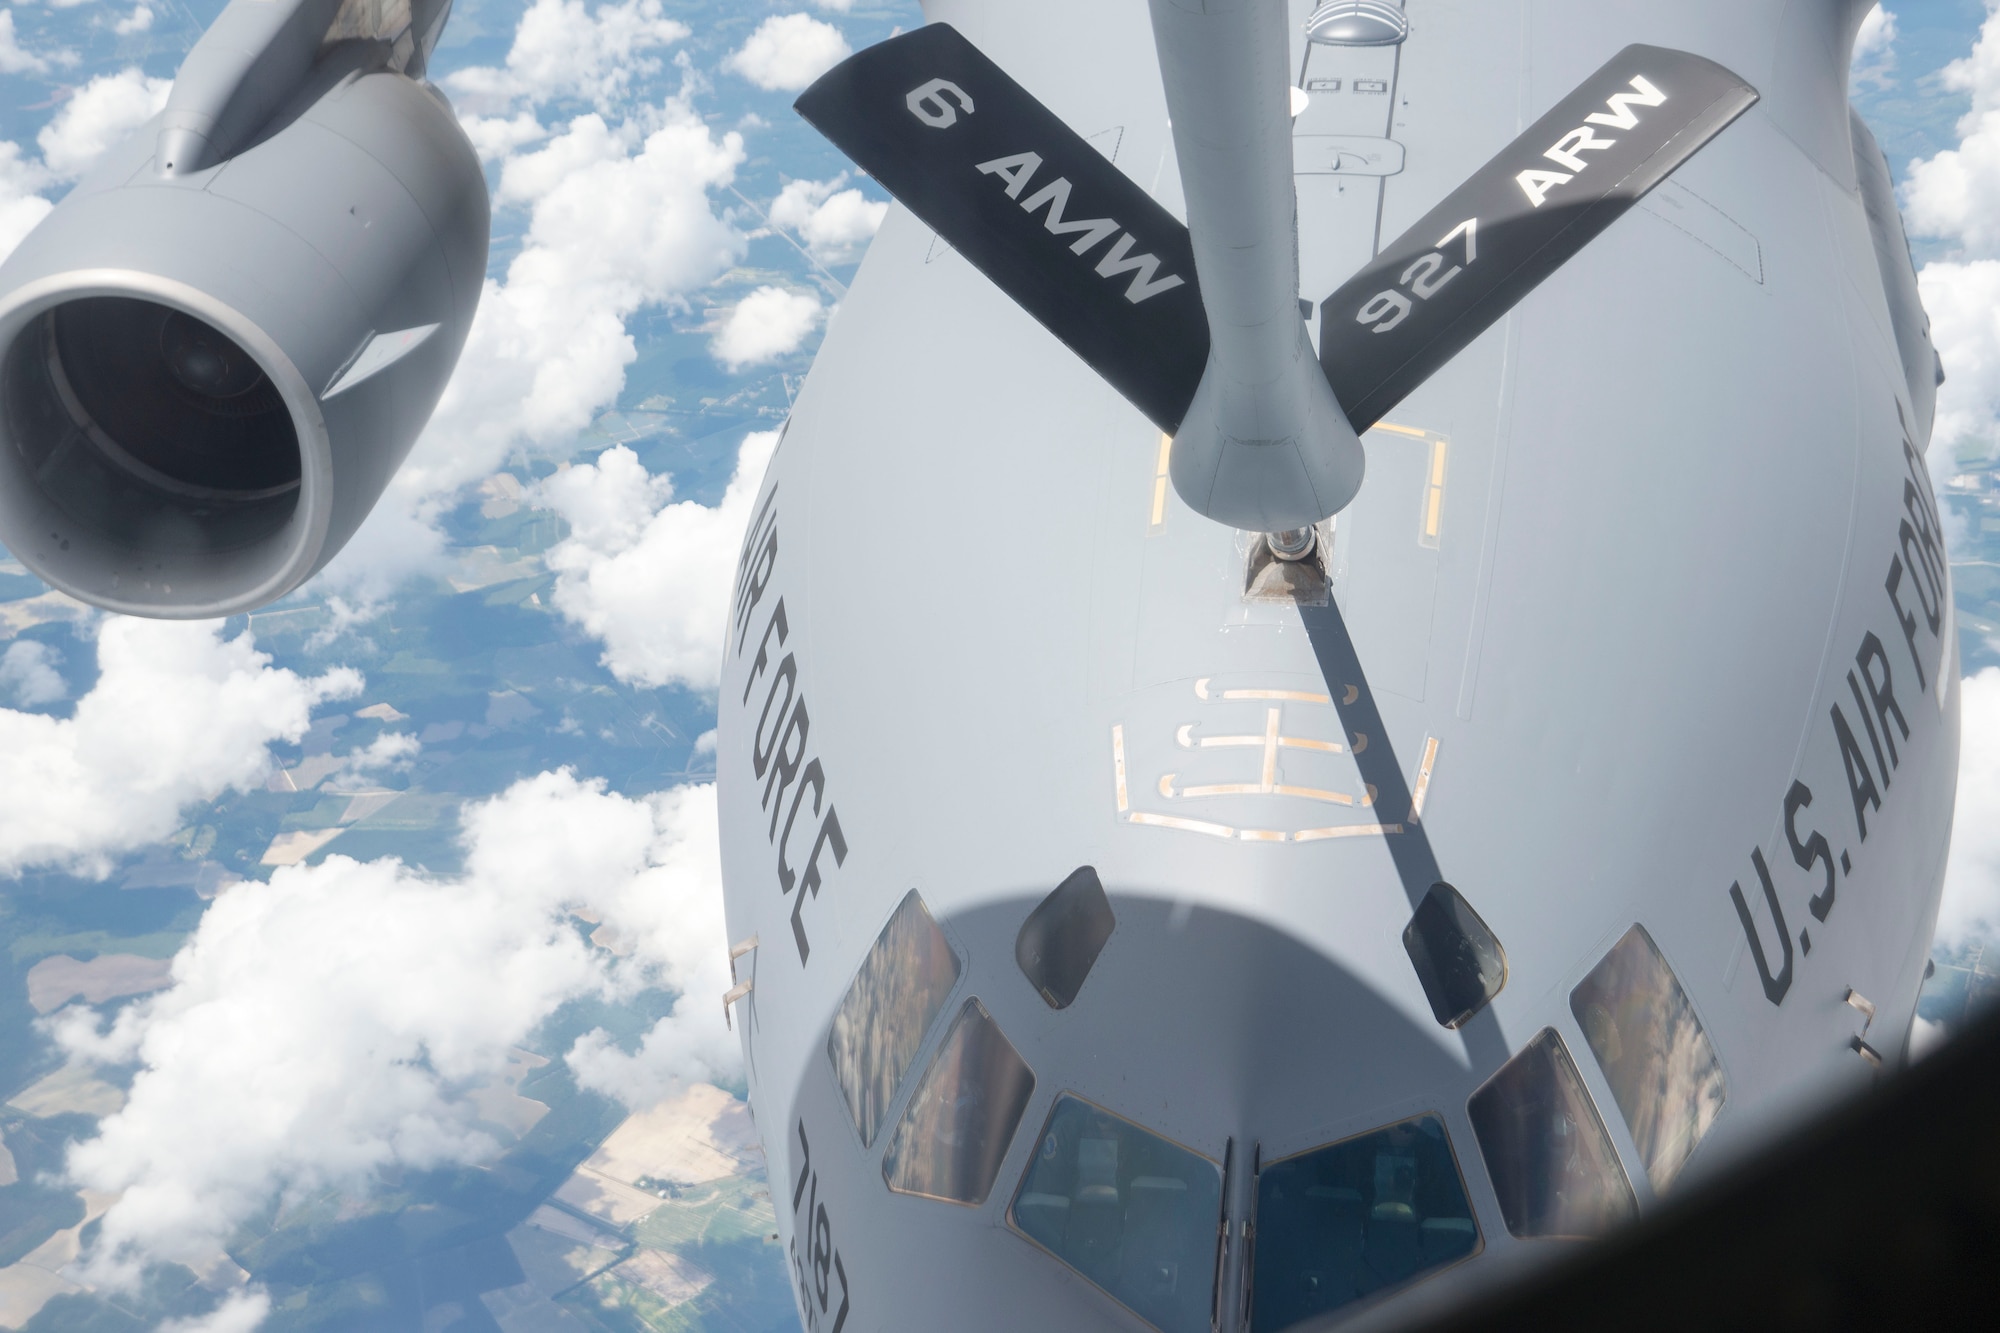 A C-17 Globemaster III aircraft assigned to Joint Base Charleston, South Carolina, receives fuel from a KC-135 Stratotanker aircraft assigned to MacDill Air Force Base, Fla., July 2, 2018.